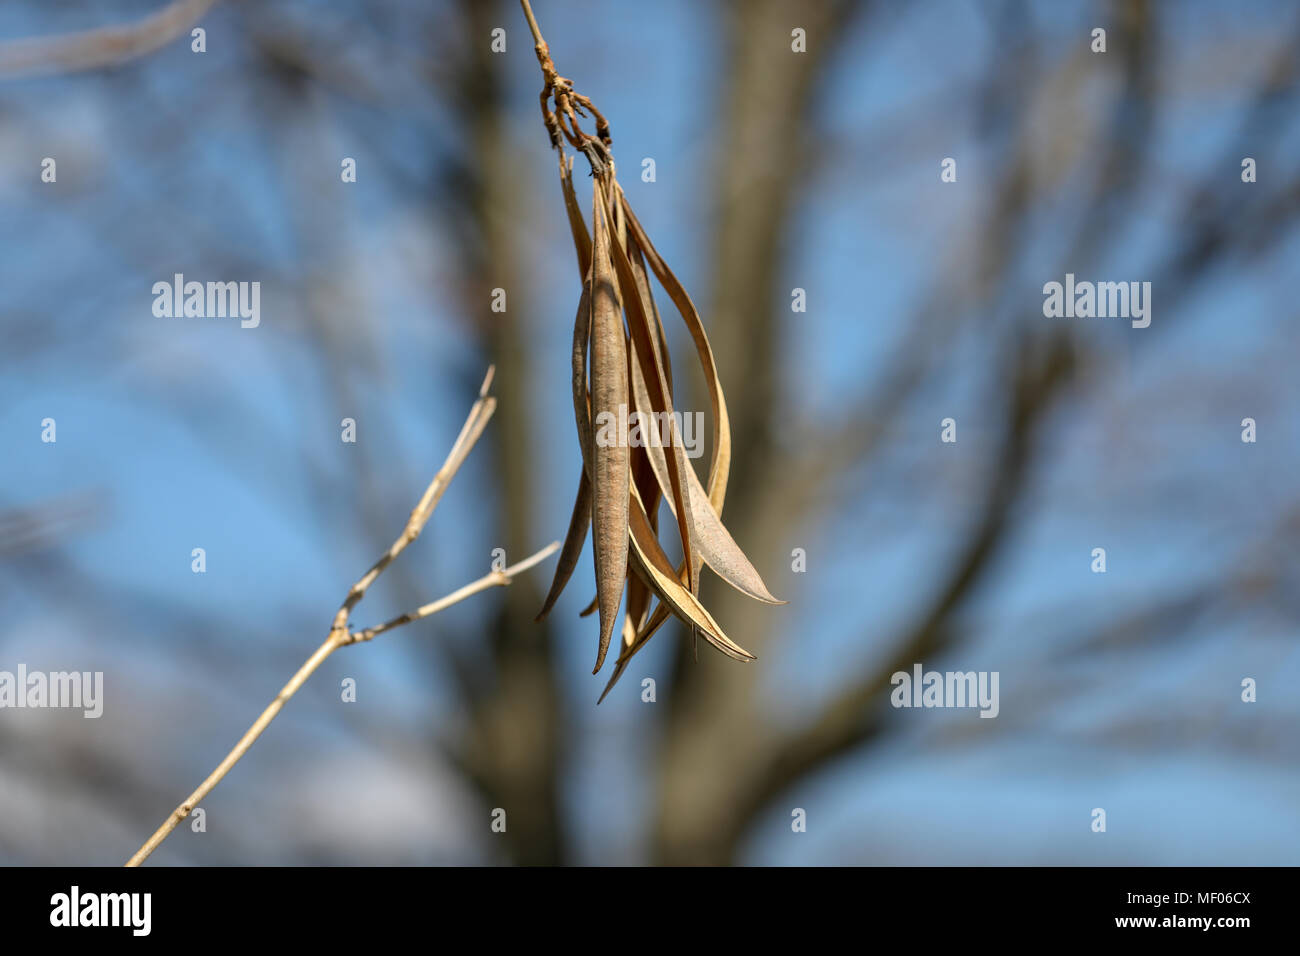 close up image of large seeds hanging from tree Stock Photo